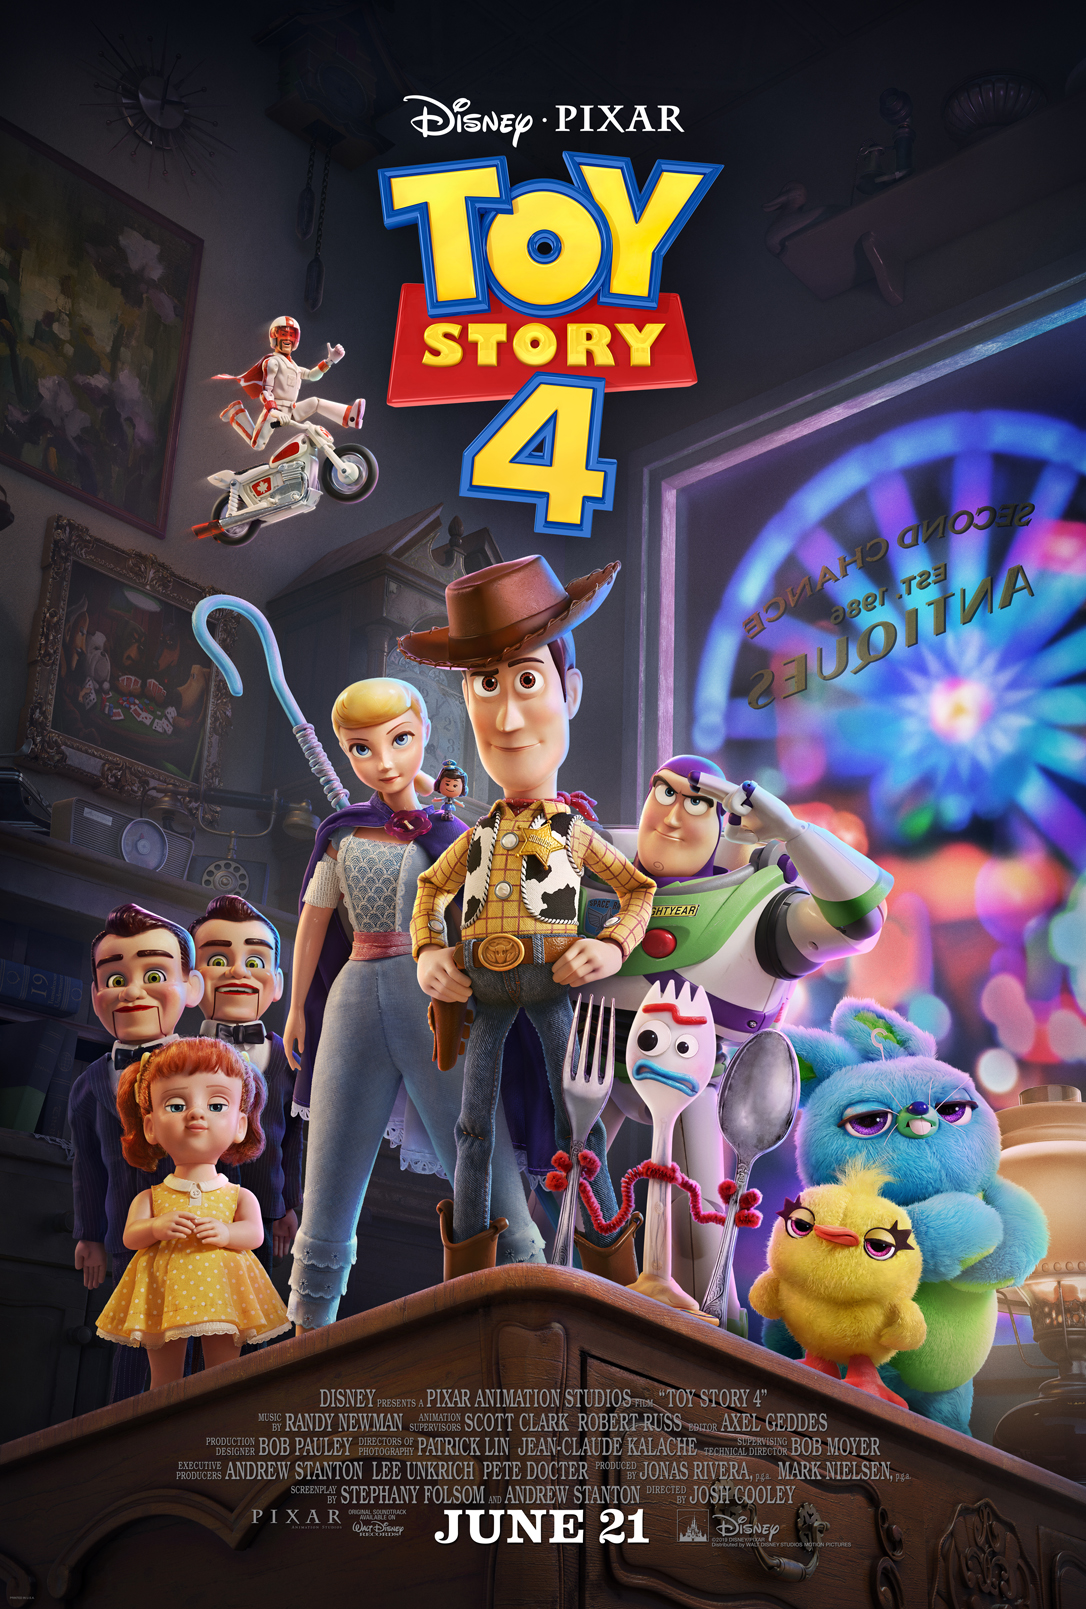 Check out Disney's new Toy Story 4 poster! 